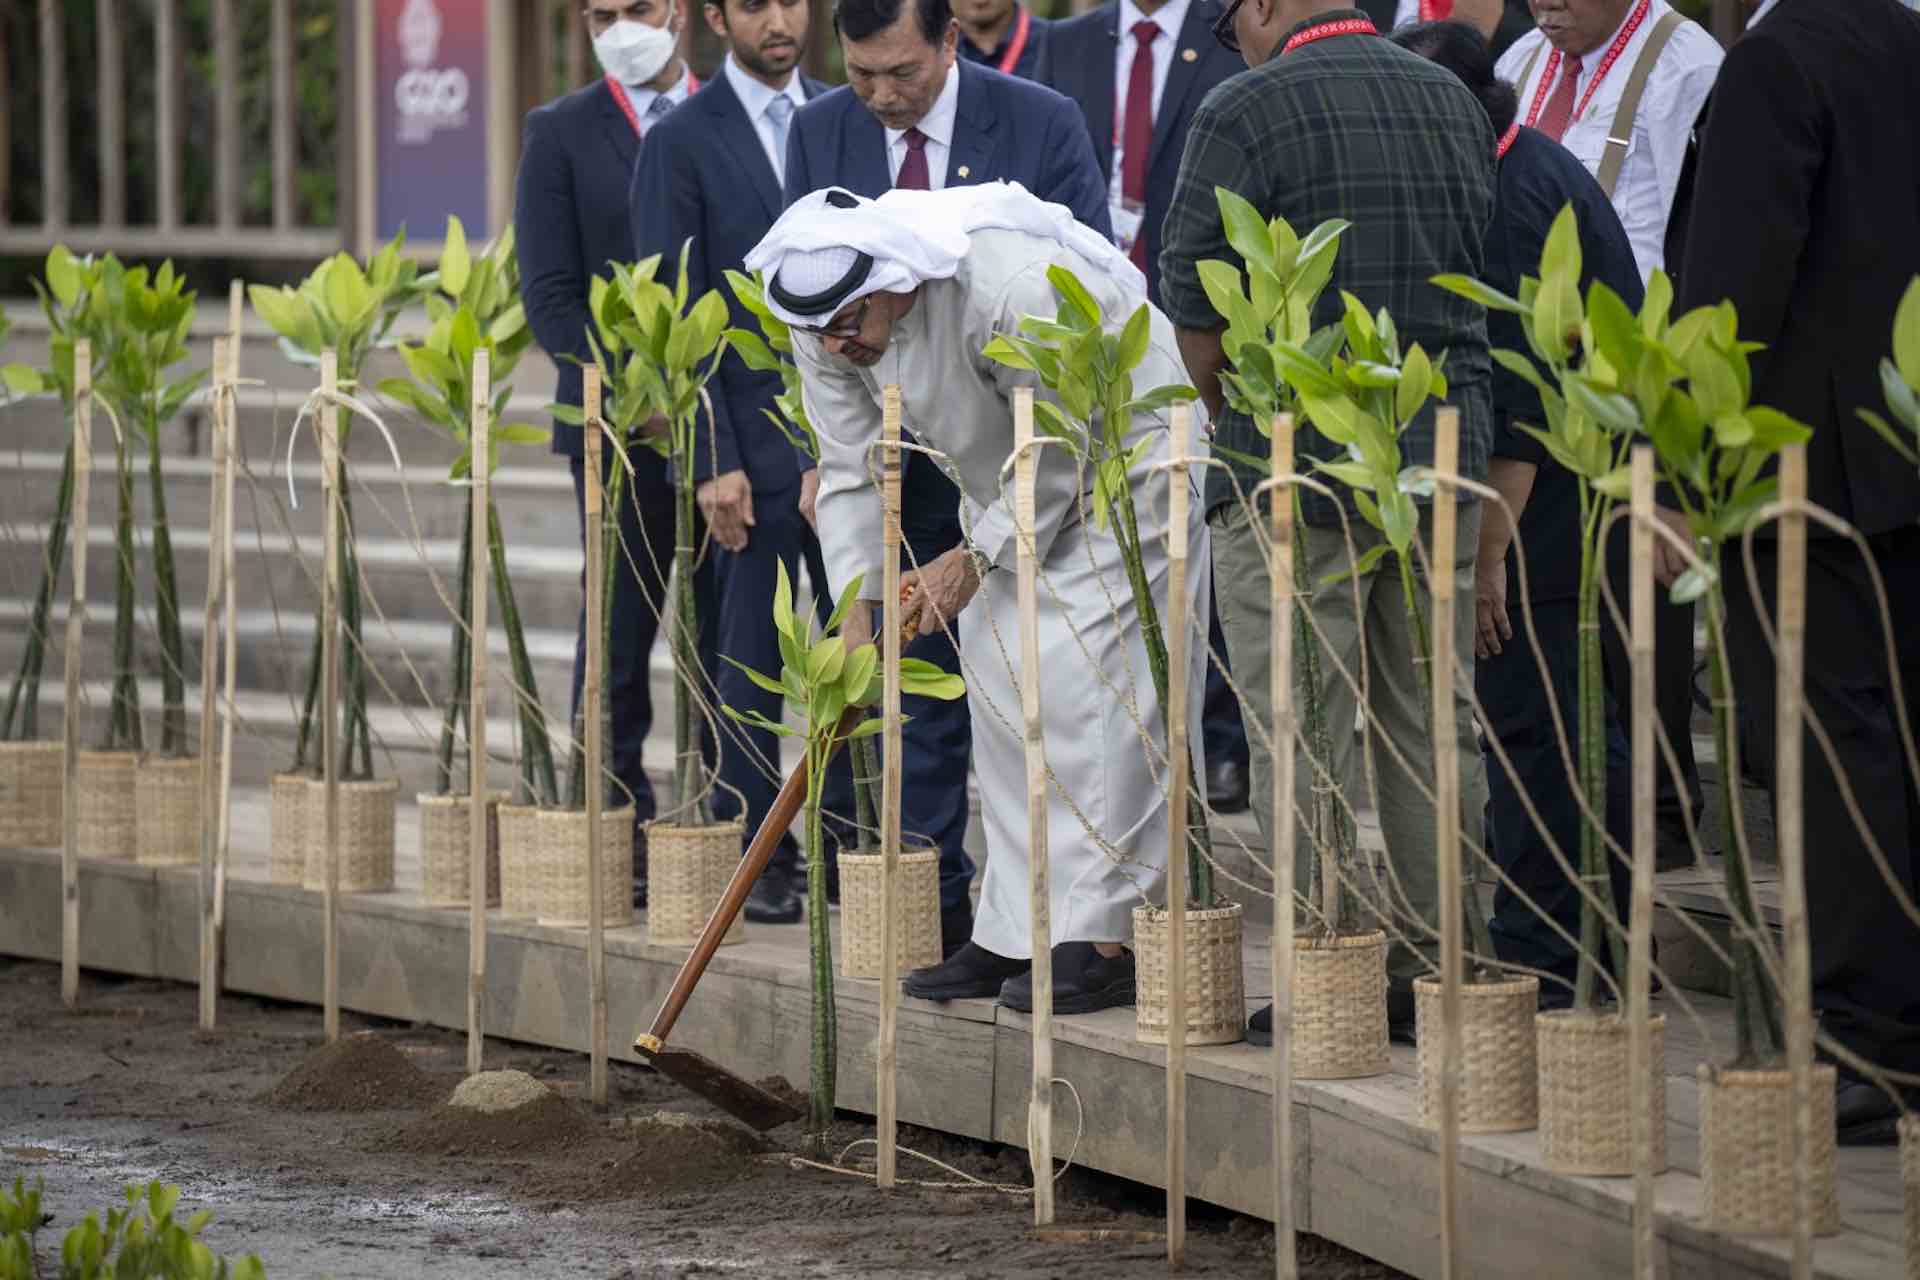 On the sidelines of the G20 Summit in Bali, Sheikh Mohamed planted a mangrove tree